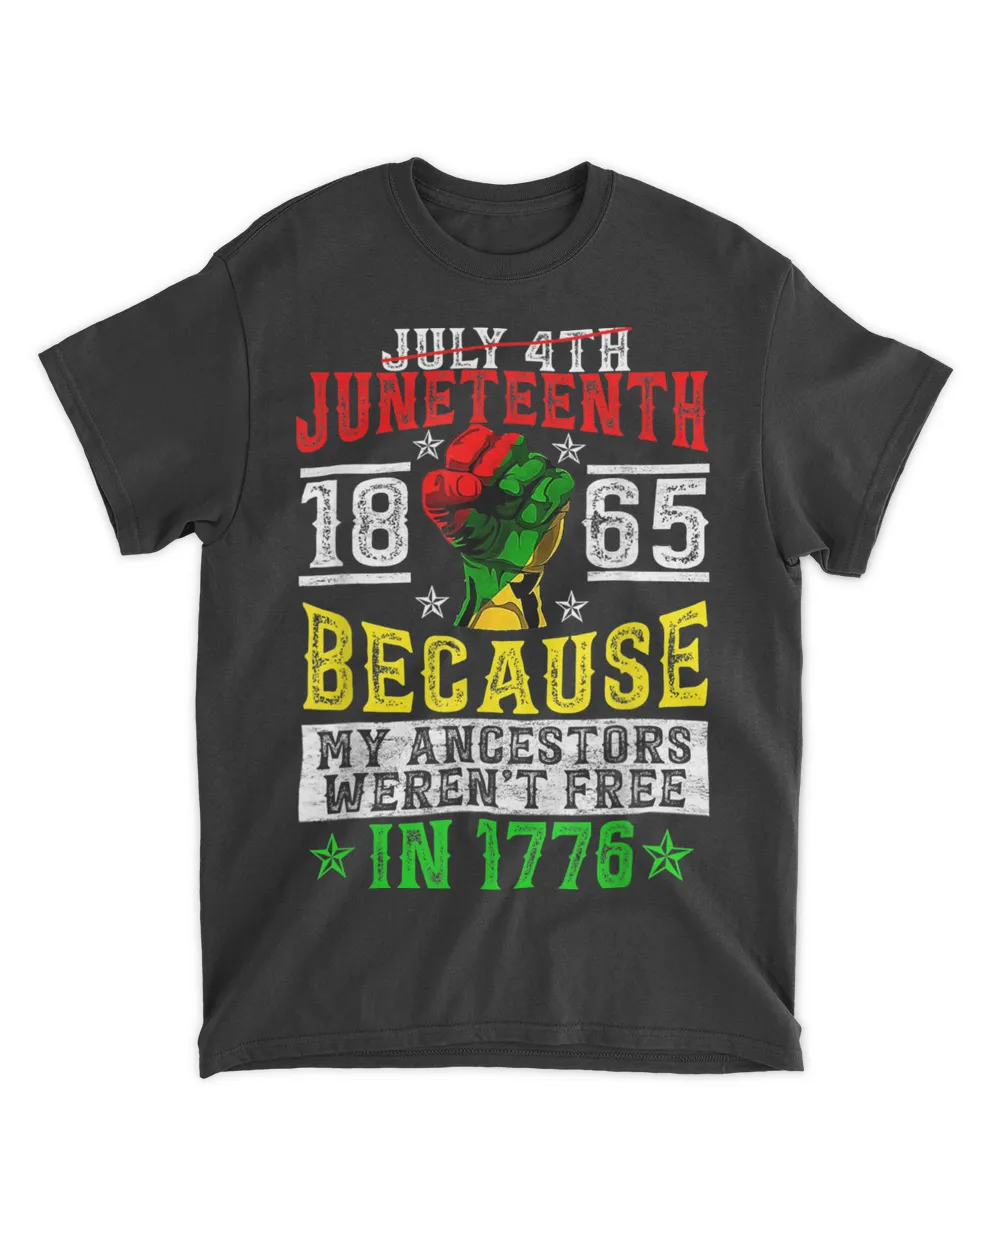 July 4th Juneteenth 1865 Celebrate African Americans Freedom T-Shirt (1)